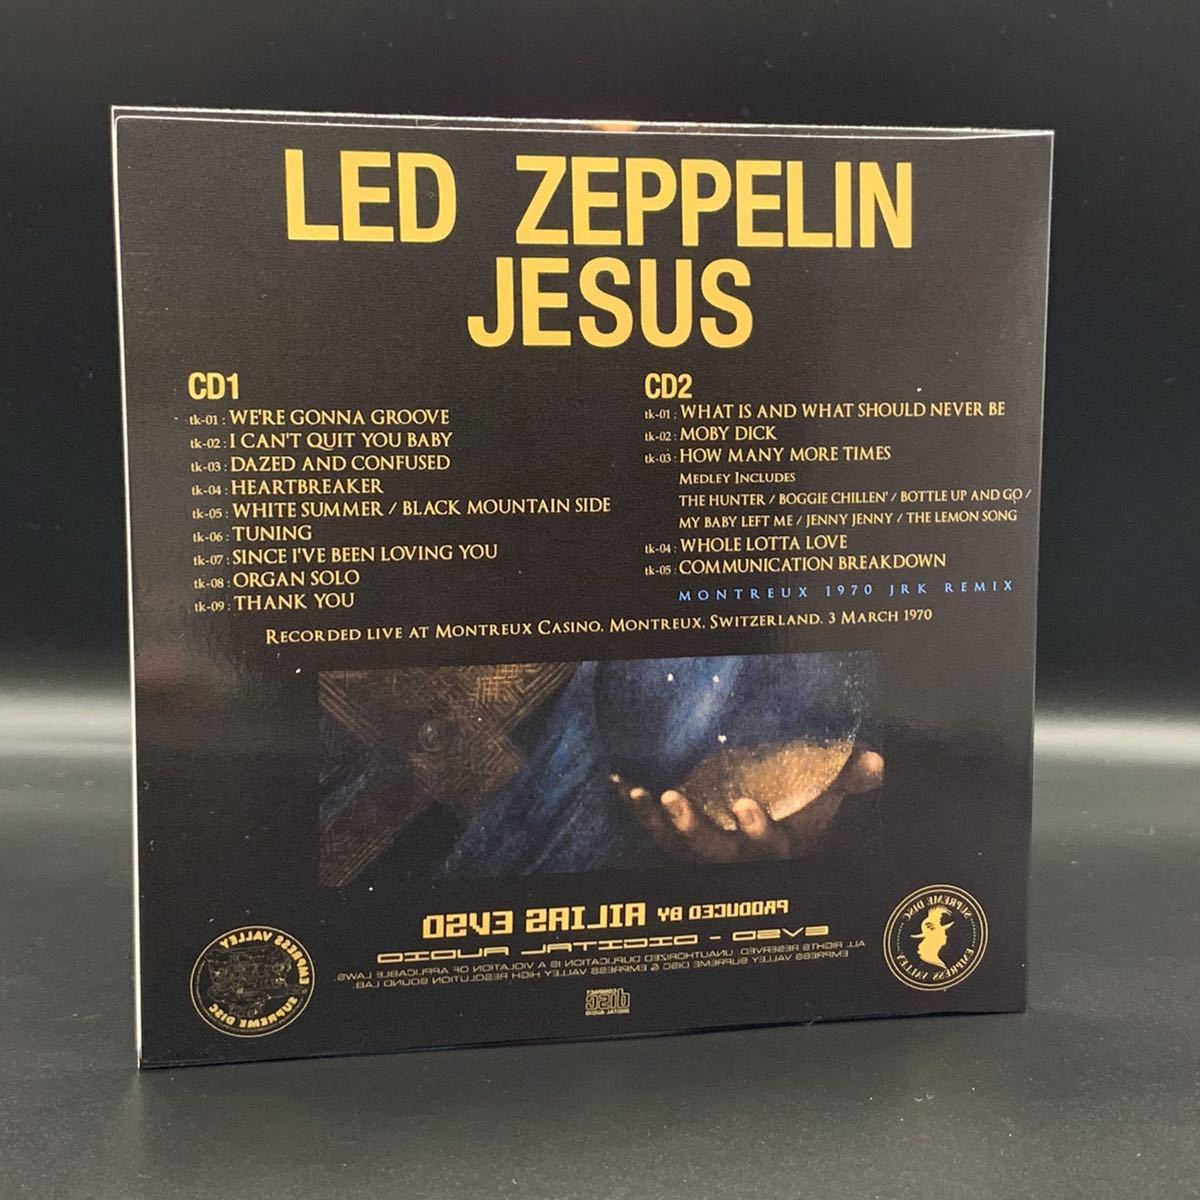 LED ZEPPELIN : JESUS 「ジュデアのジェズス」 2CD 工場プレス銀盤CD 1970 MONTREUX 限定盤！の画像4